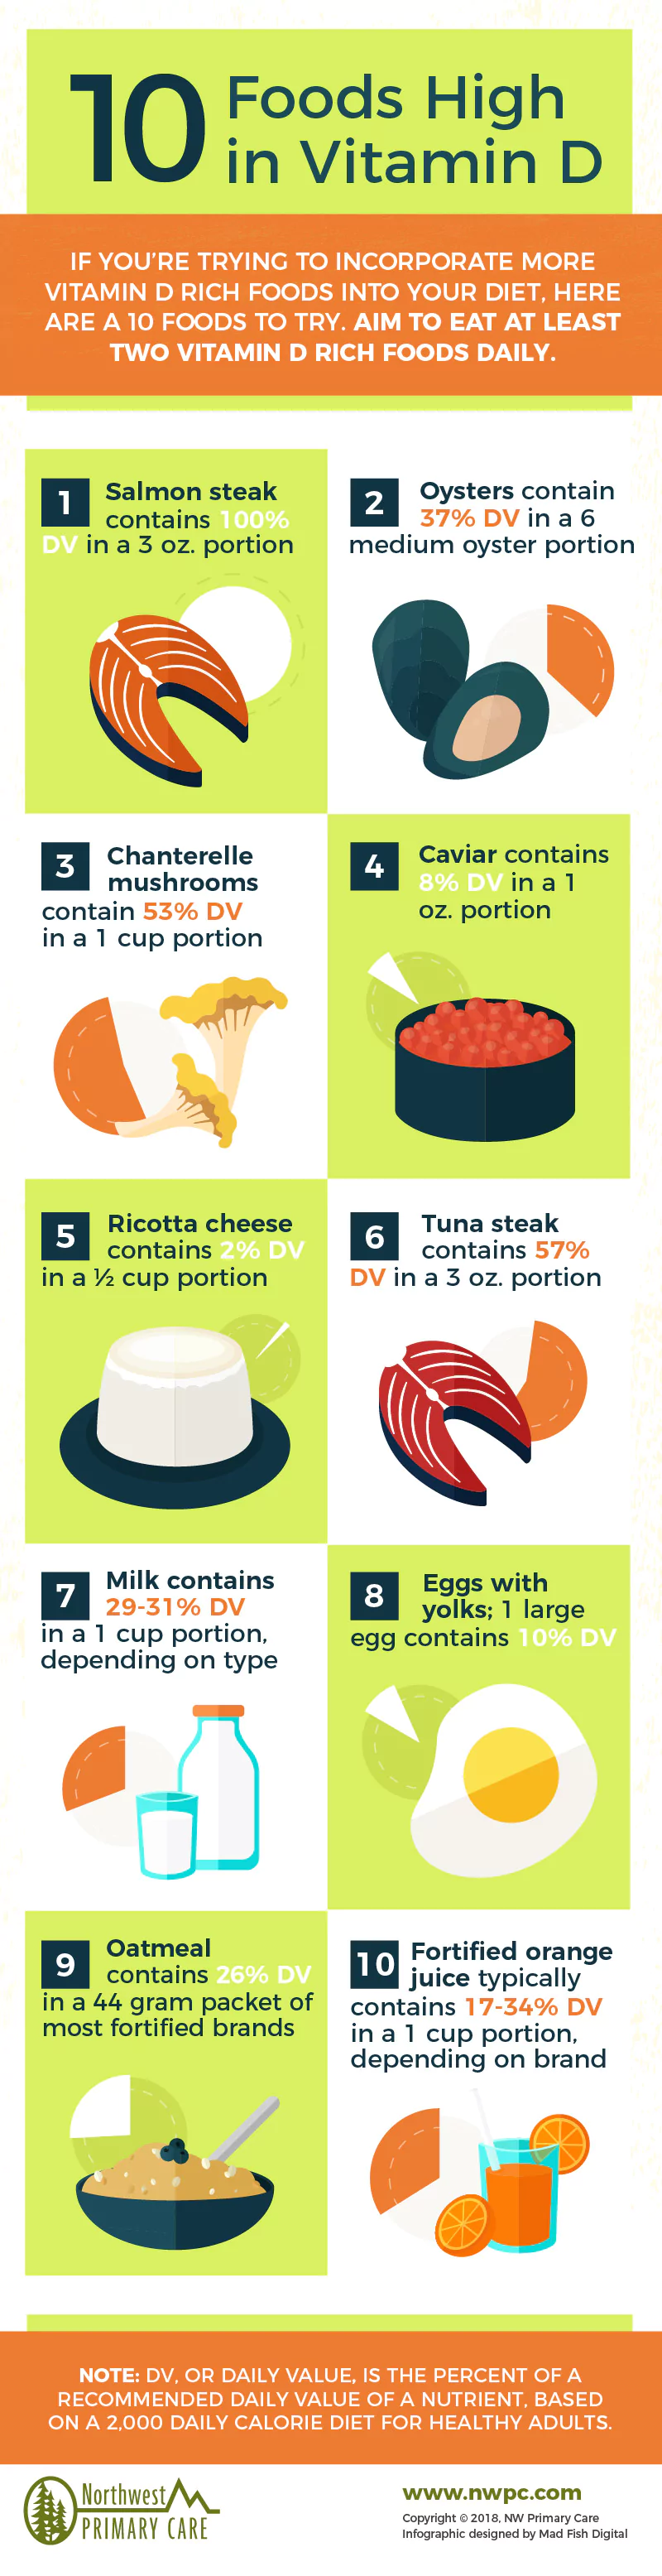 10 Foods High in Vitamin D